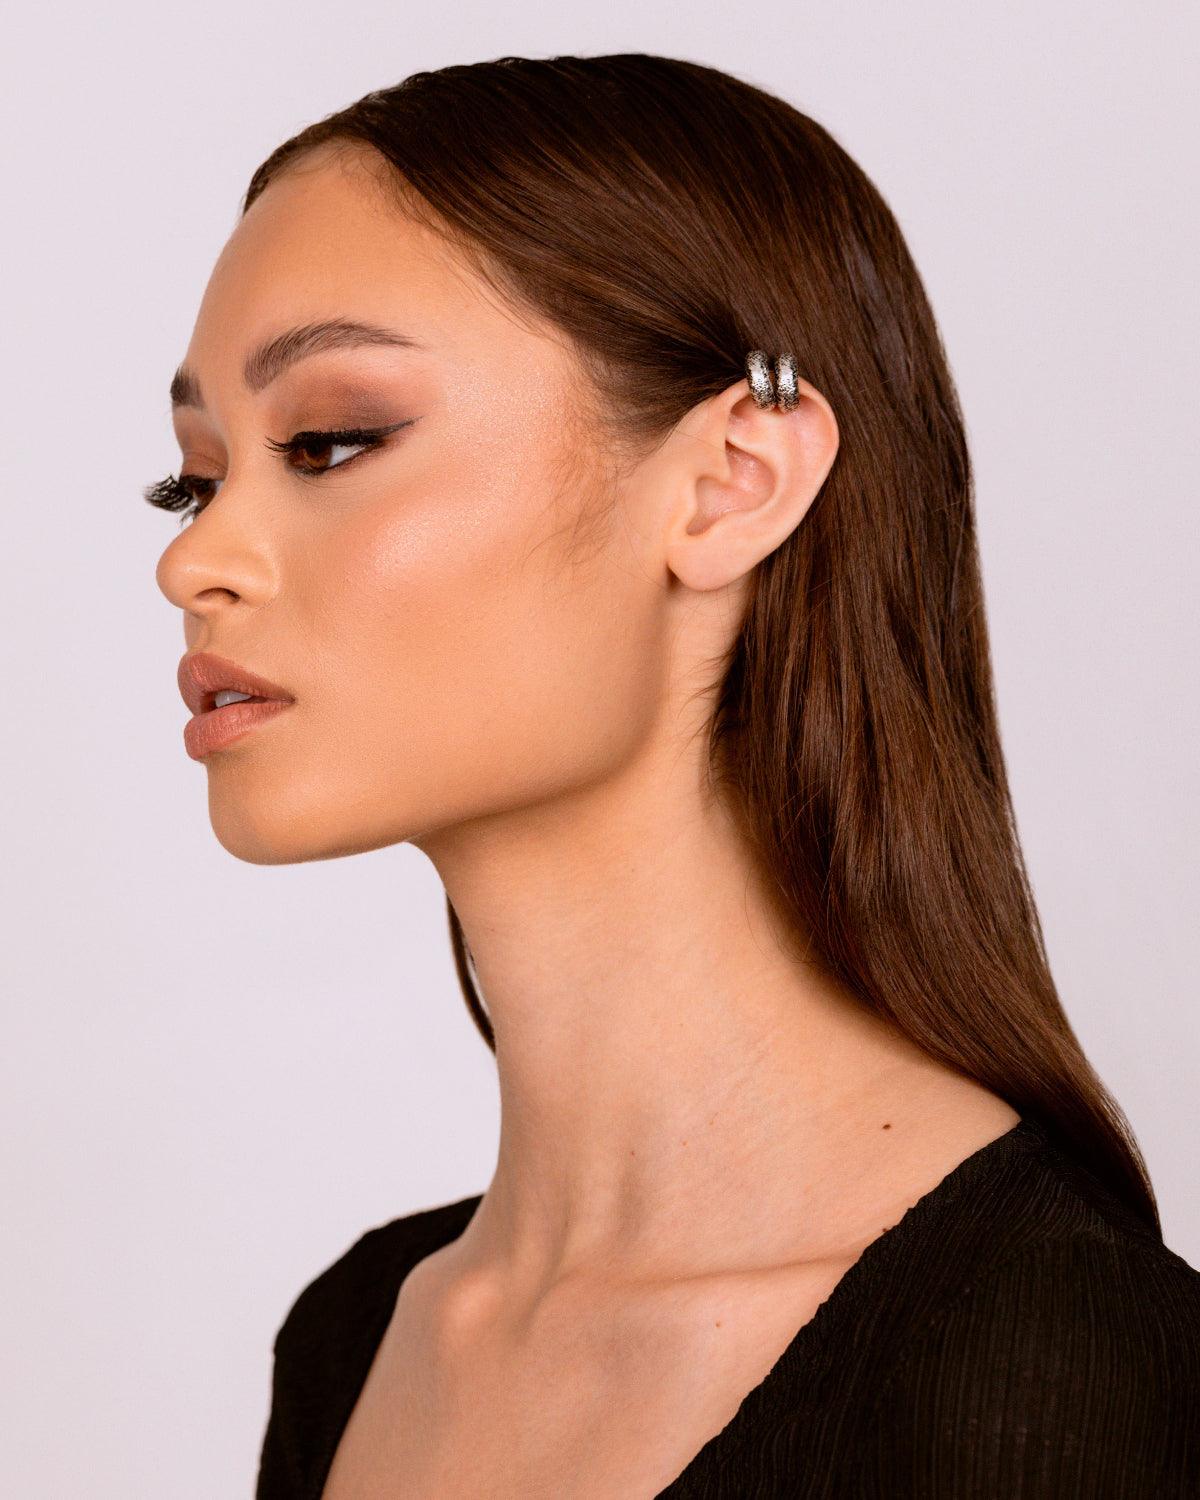 BURNISHED SILVER EAR CUFFS - 8 Other Reasons